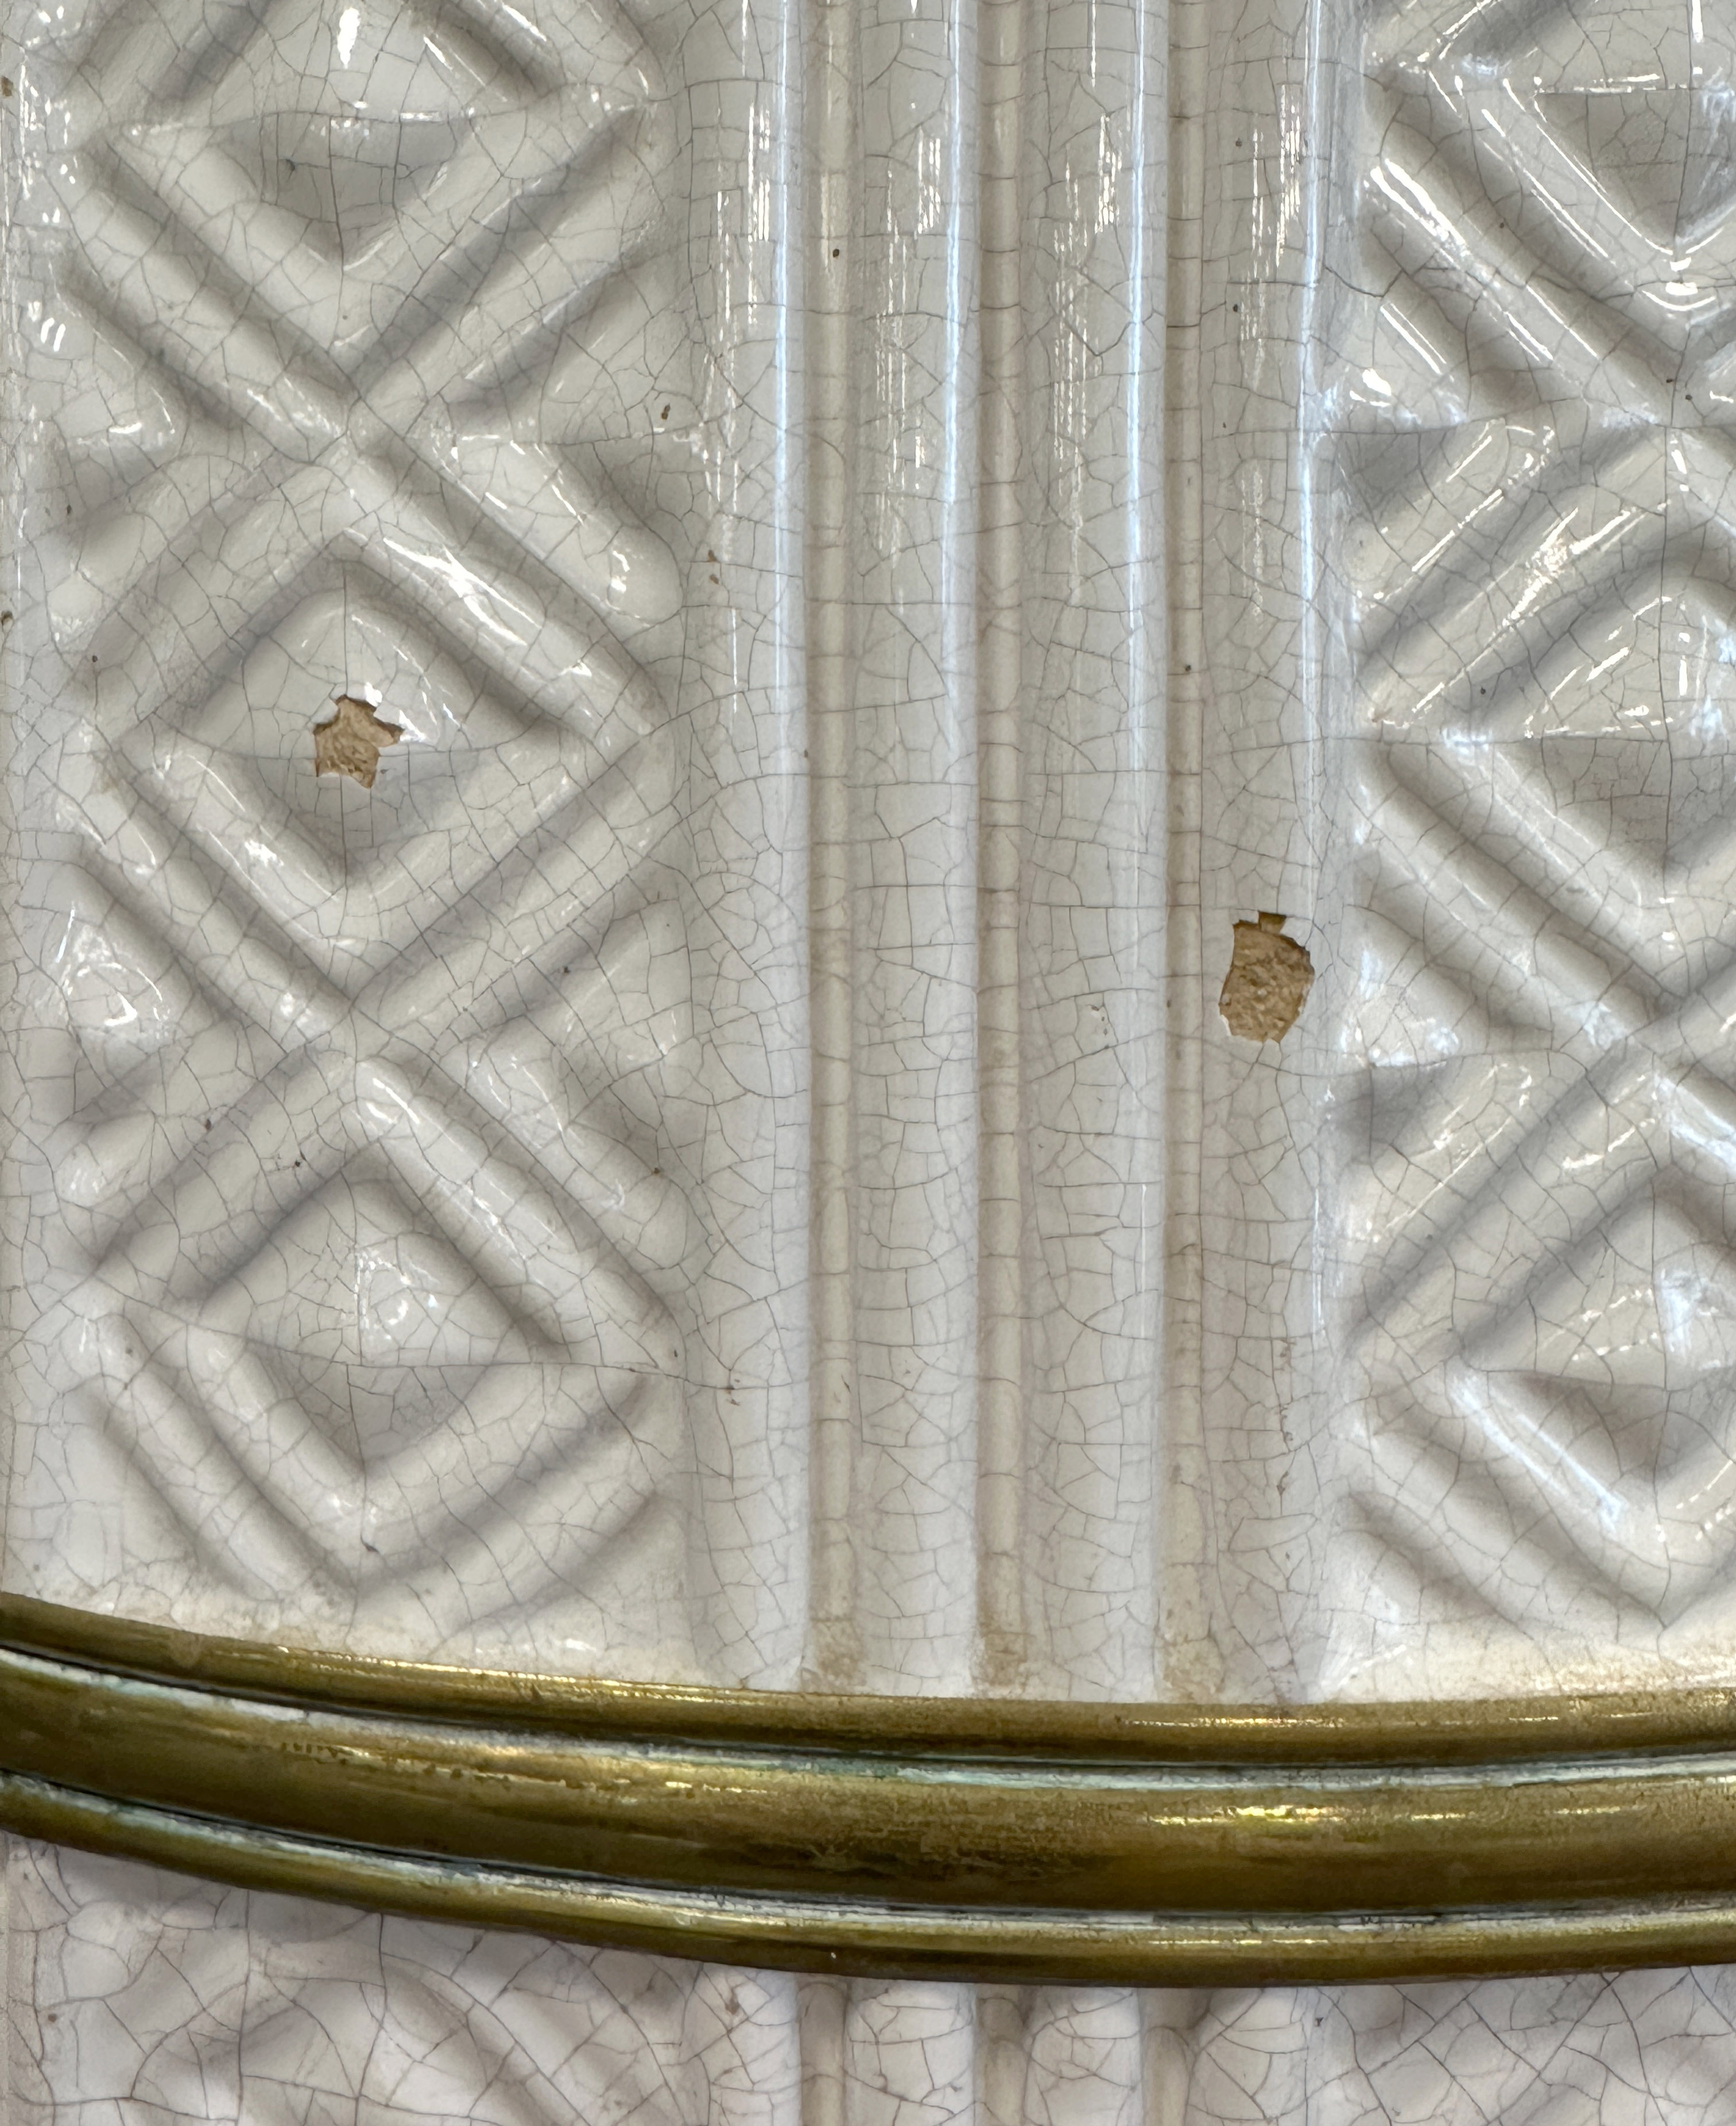 White Biedermeier round stove with tiles in relief structure. - Image 12 of 19